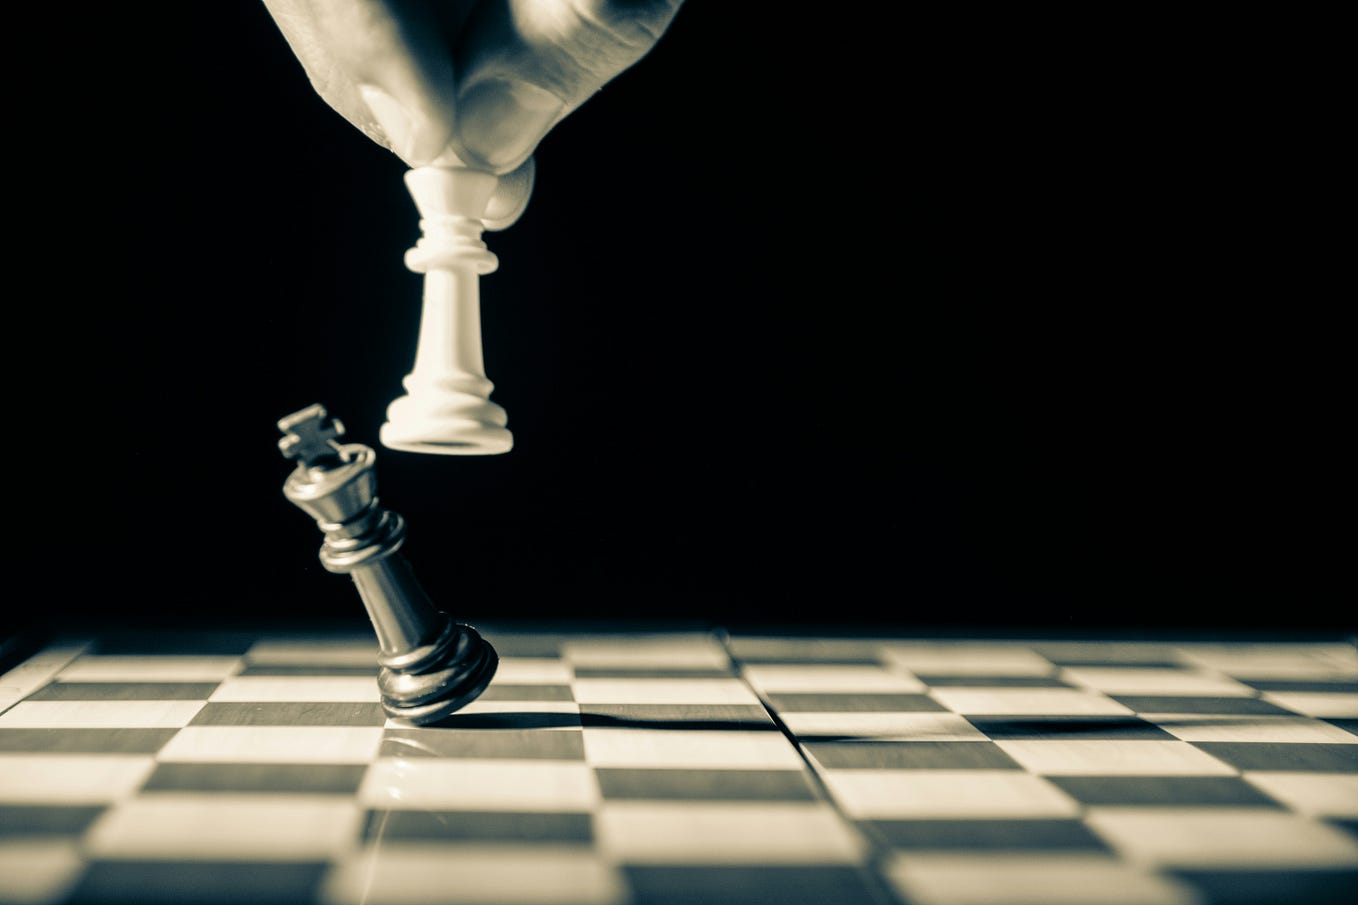 Has the same game of chess ever been played twice? - Quora